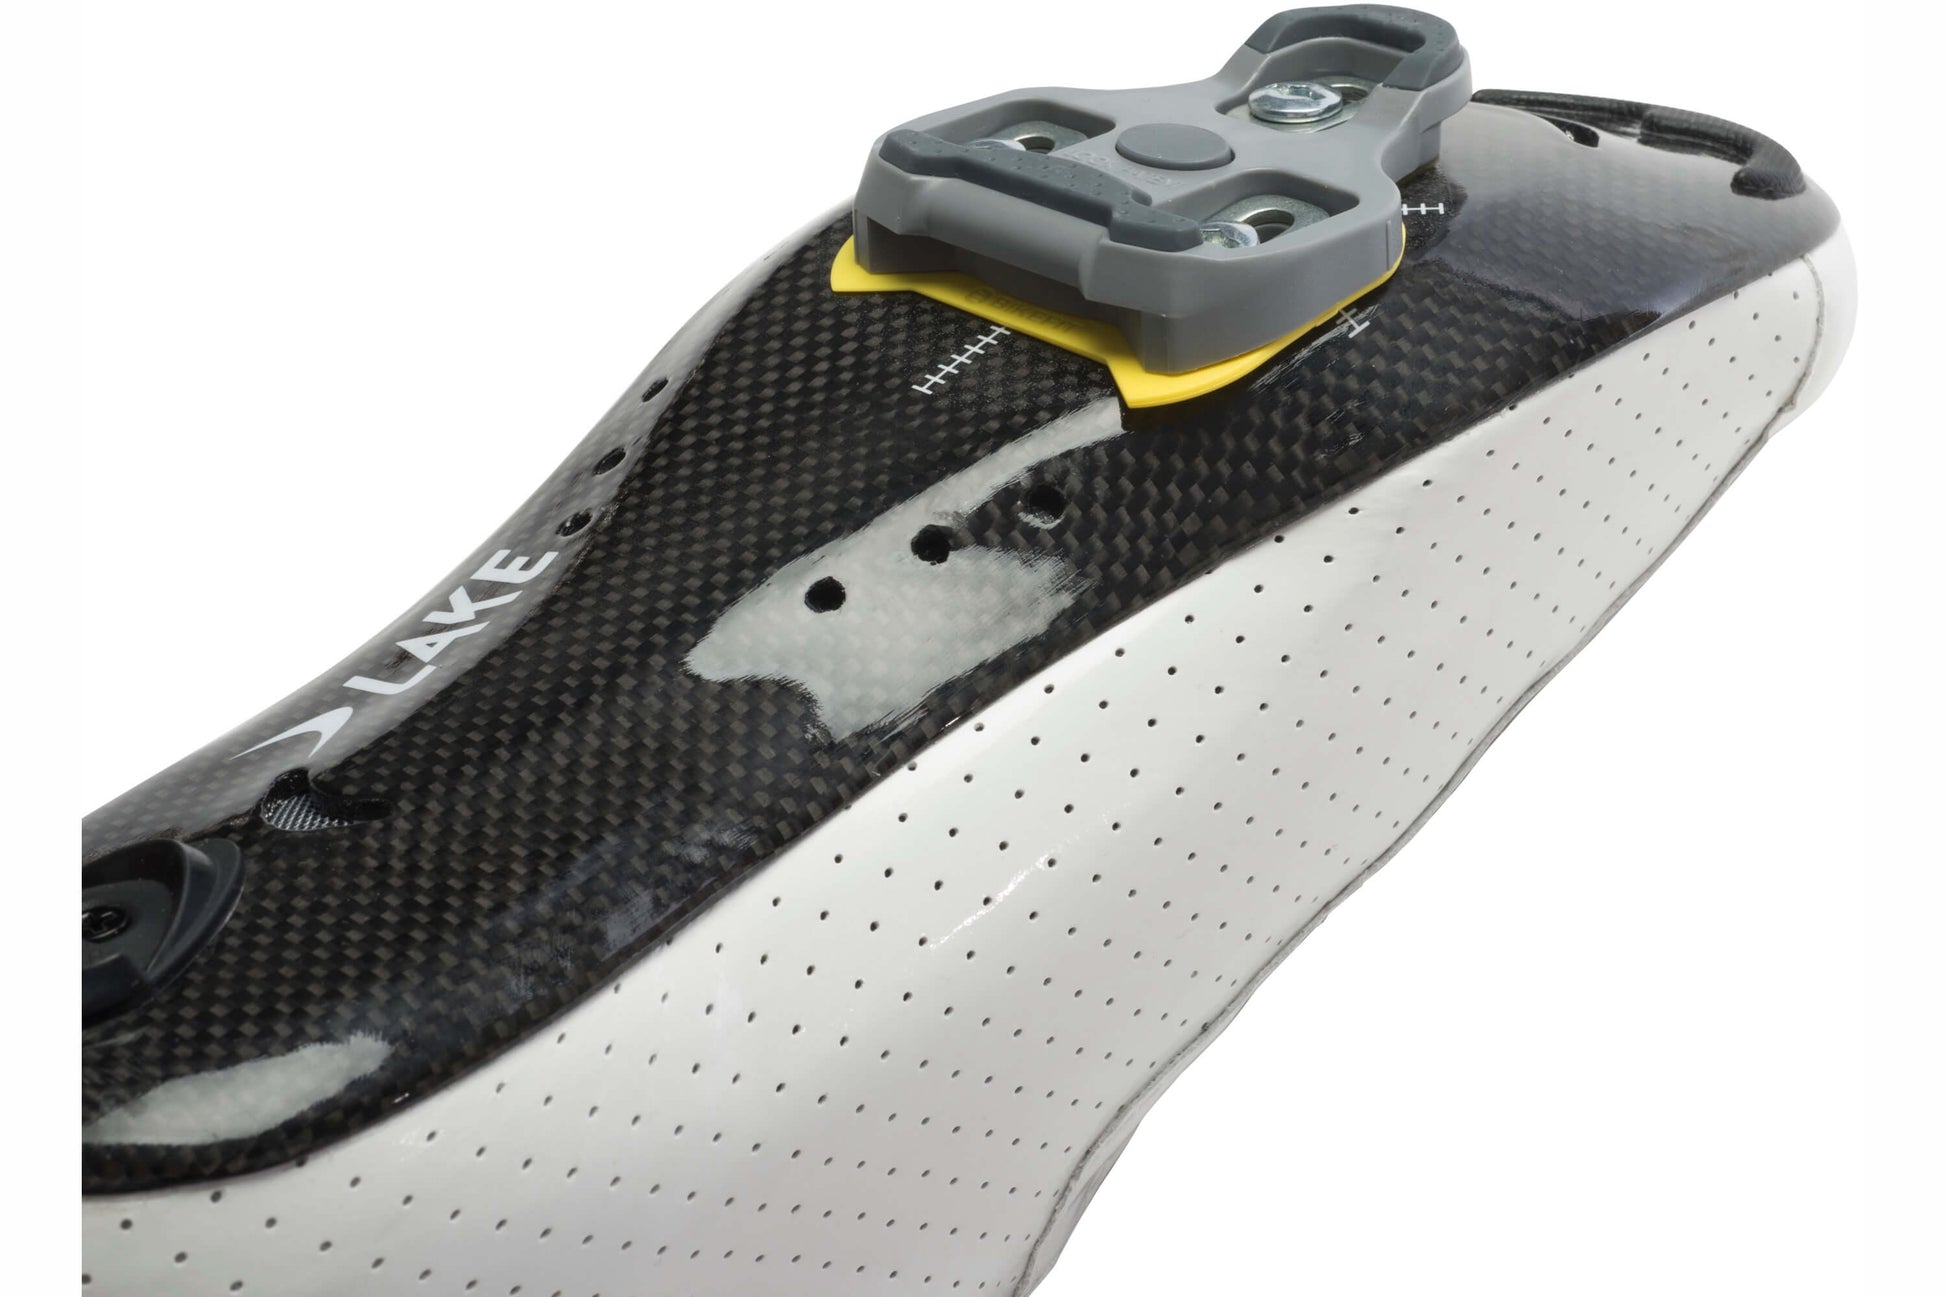 BikeFit Cleat Wedge Kit - Cleat Wedge - LOOK/Shimano Compatible, cleat wedge shown installed on cycling shoe